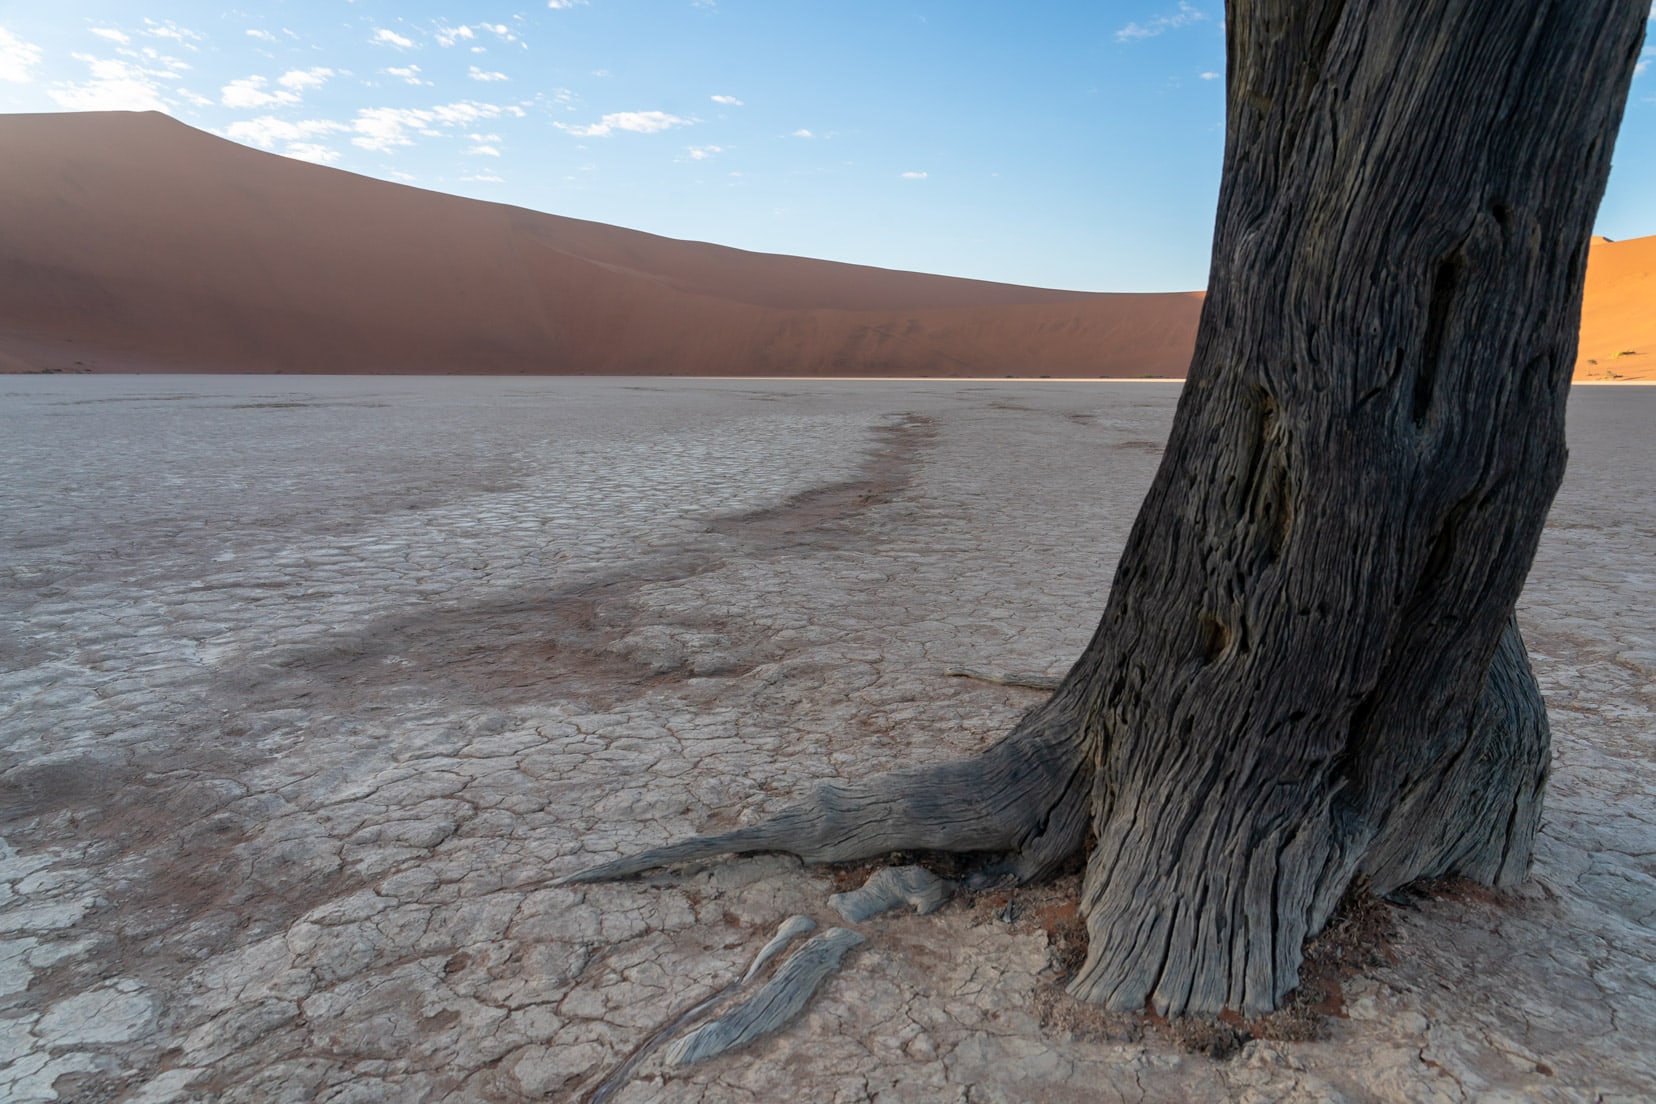 The dry pan of Deadvlei